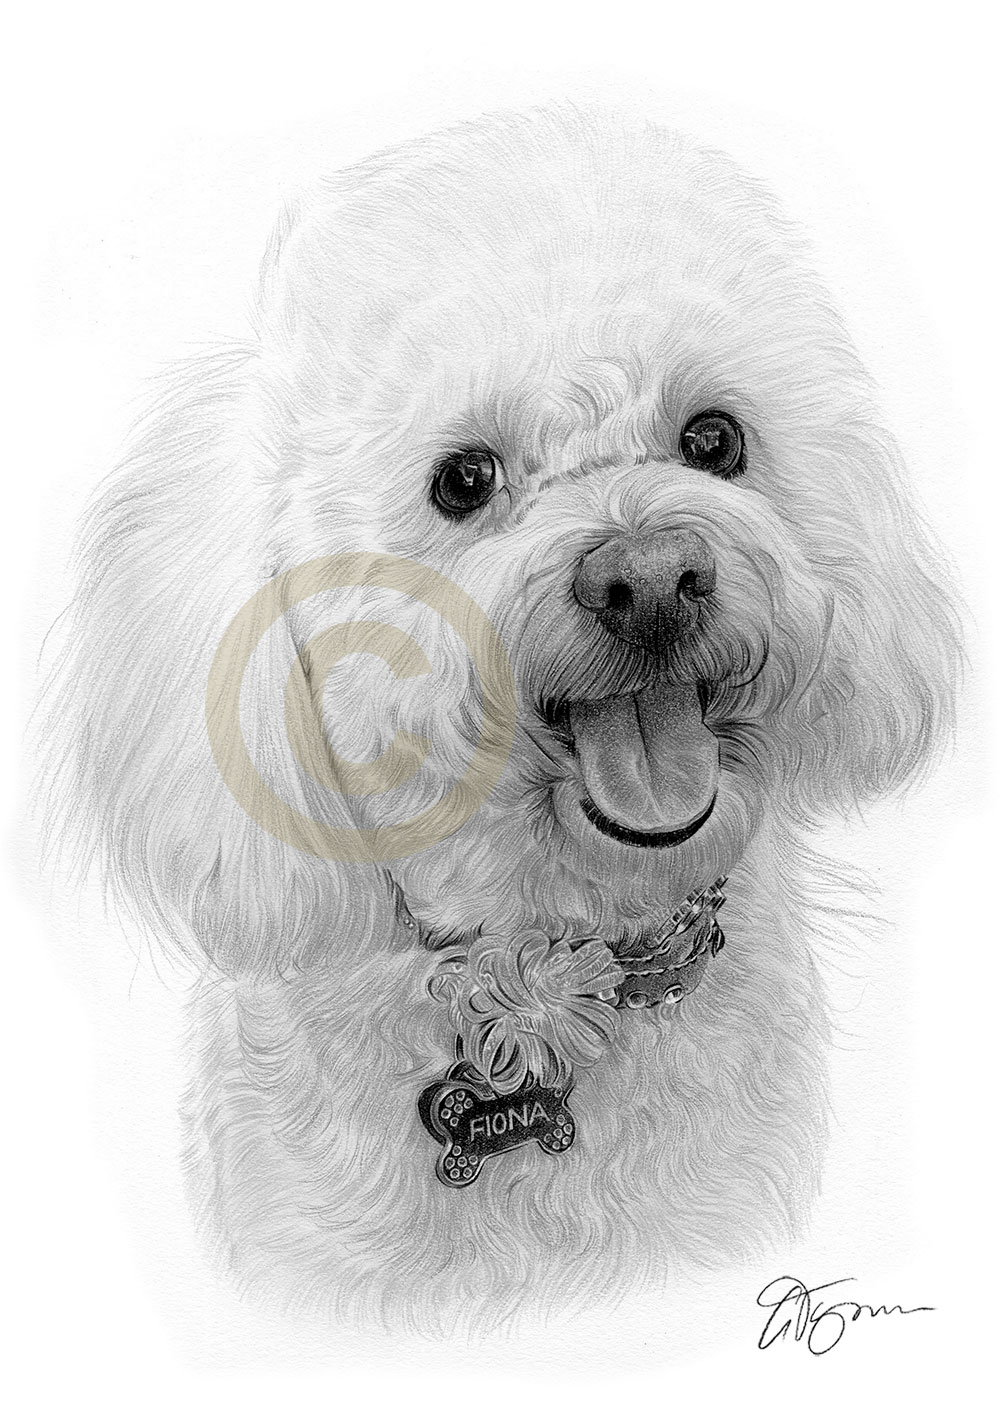 Pencil drawing commission of a dog called Fiona by artist Gary Tymon